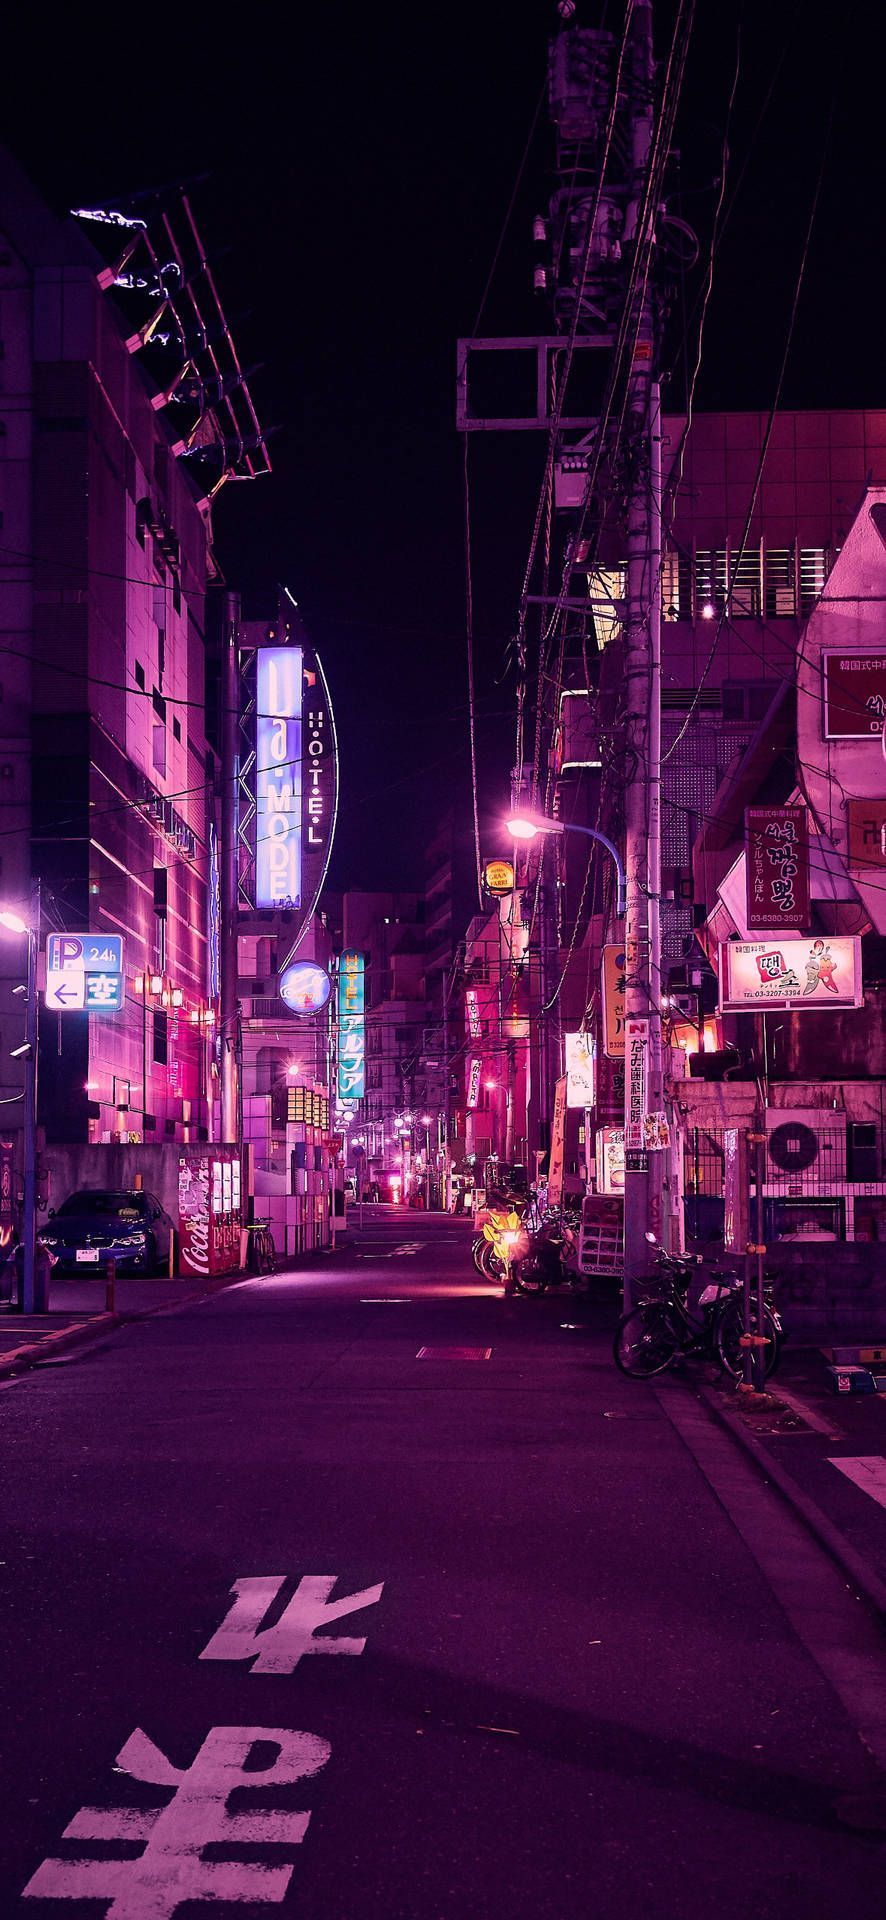 A city street at night with pink lighting - Tokyo